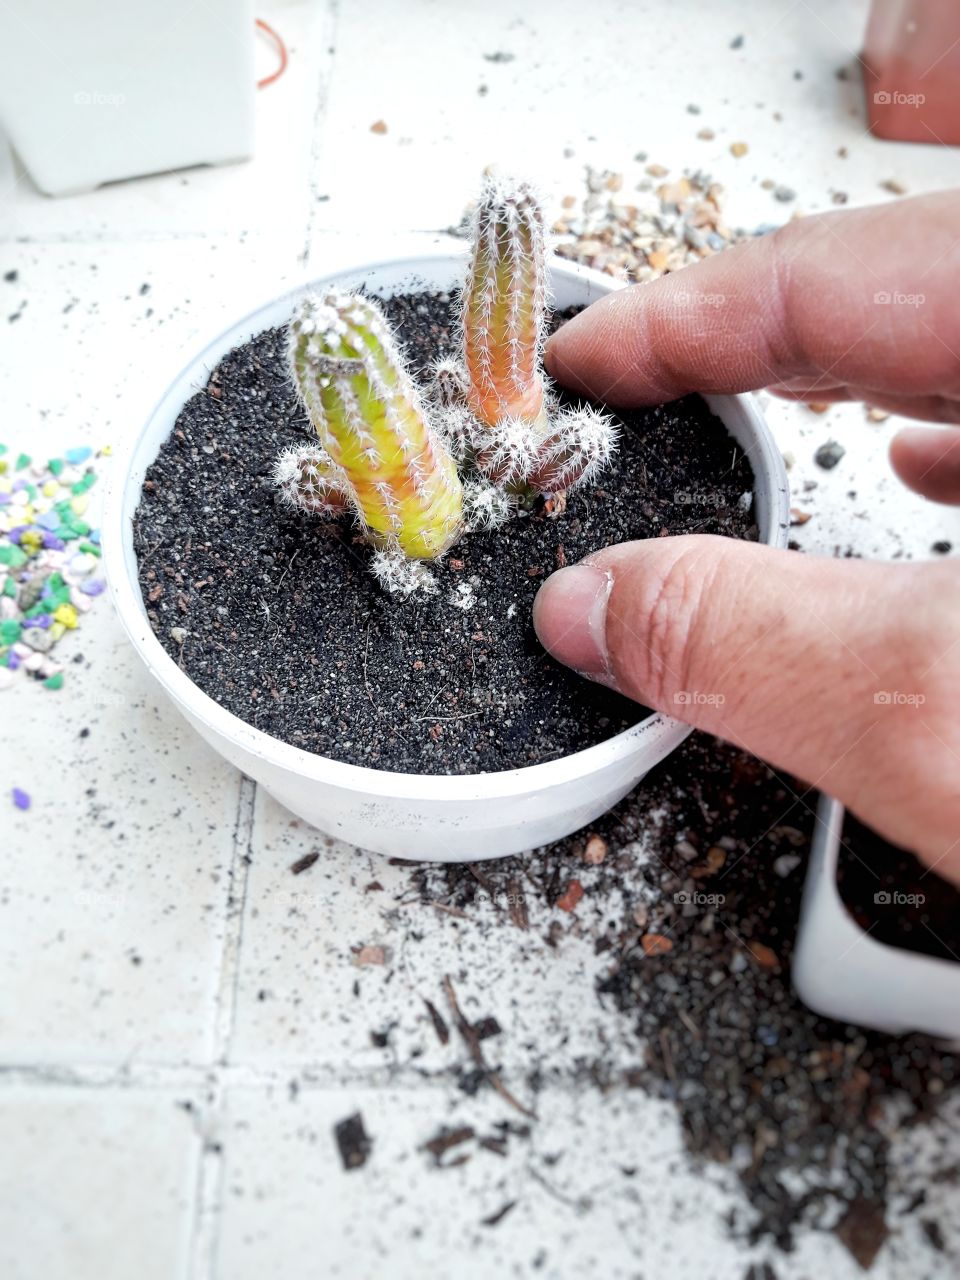 People are planting cactus plants as a hobby during their stay, a simple way of rest and happiness.